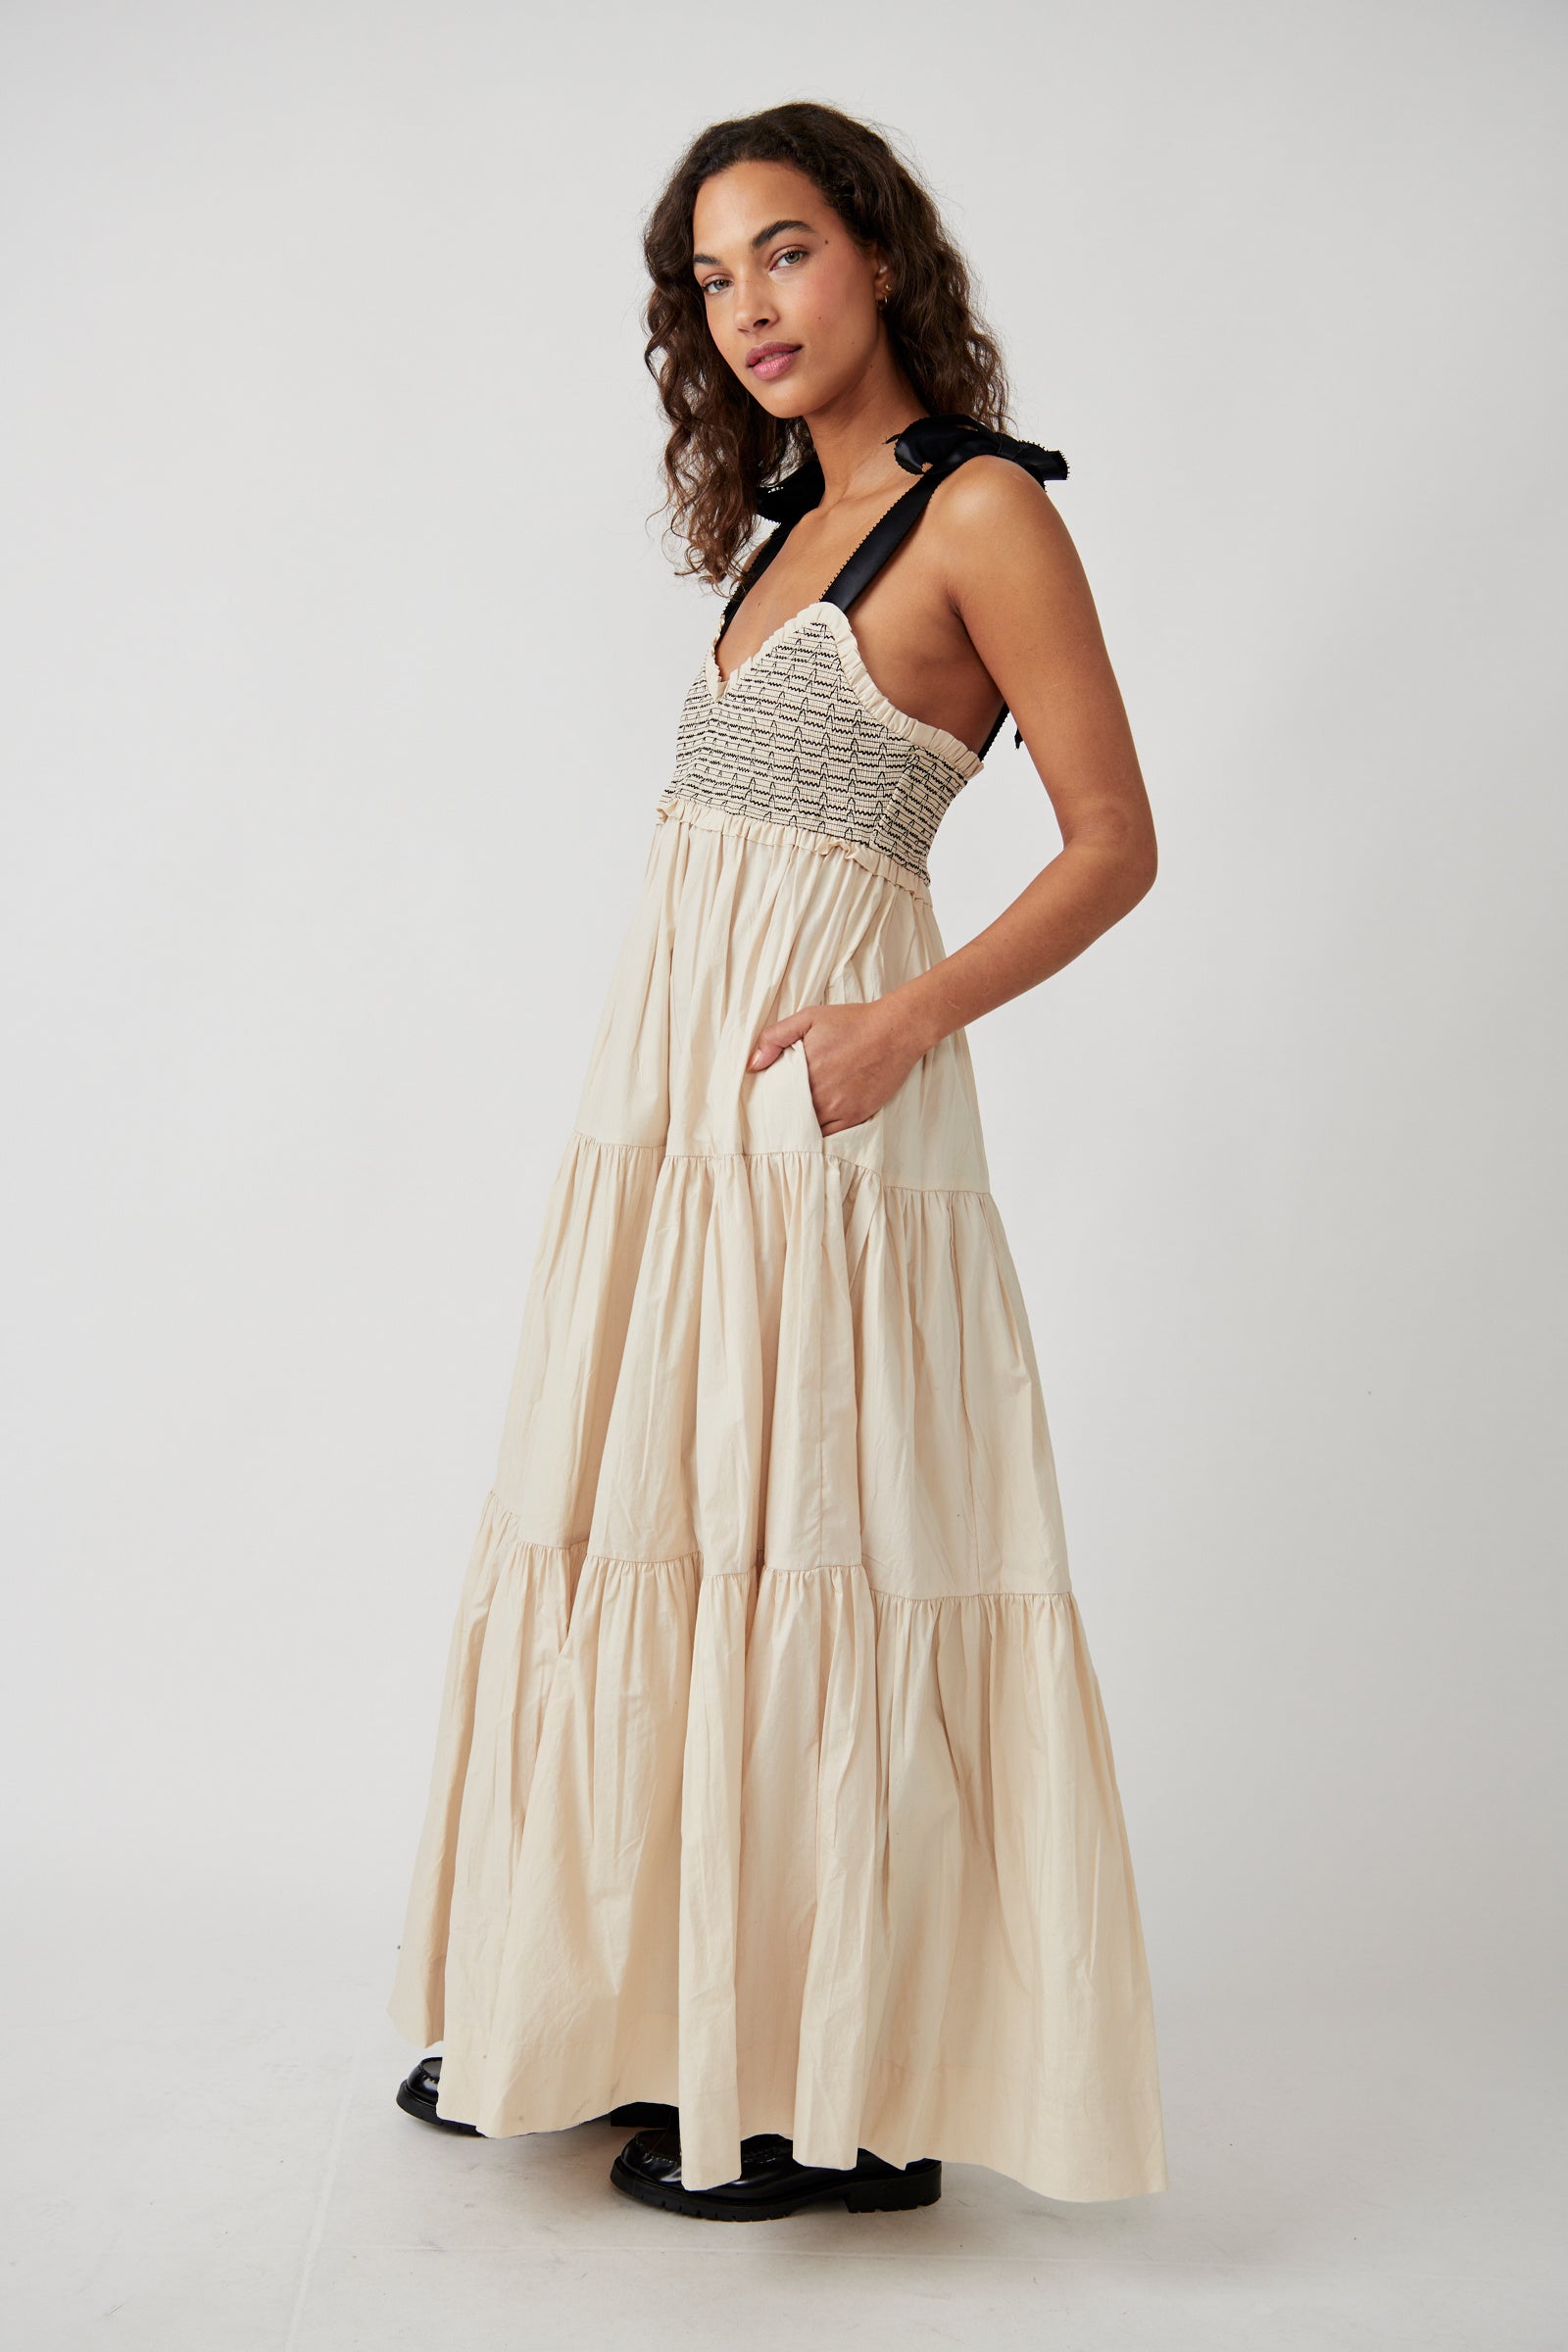 FREE PEOPLE BLUEBELL SOLID MAXI DRESS IN VACATION SAND